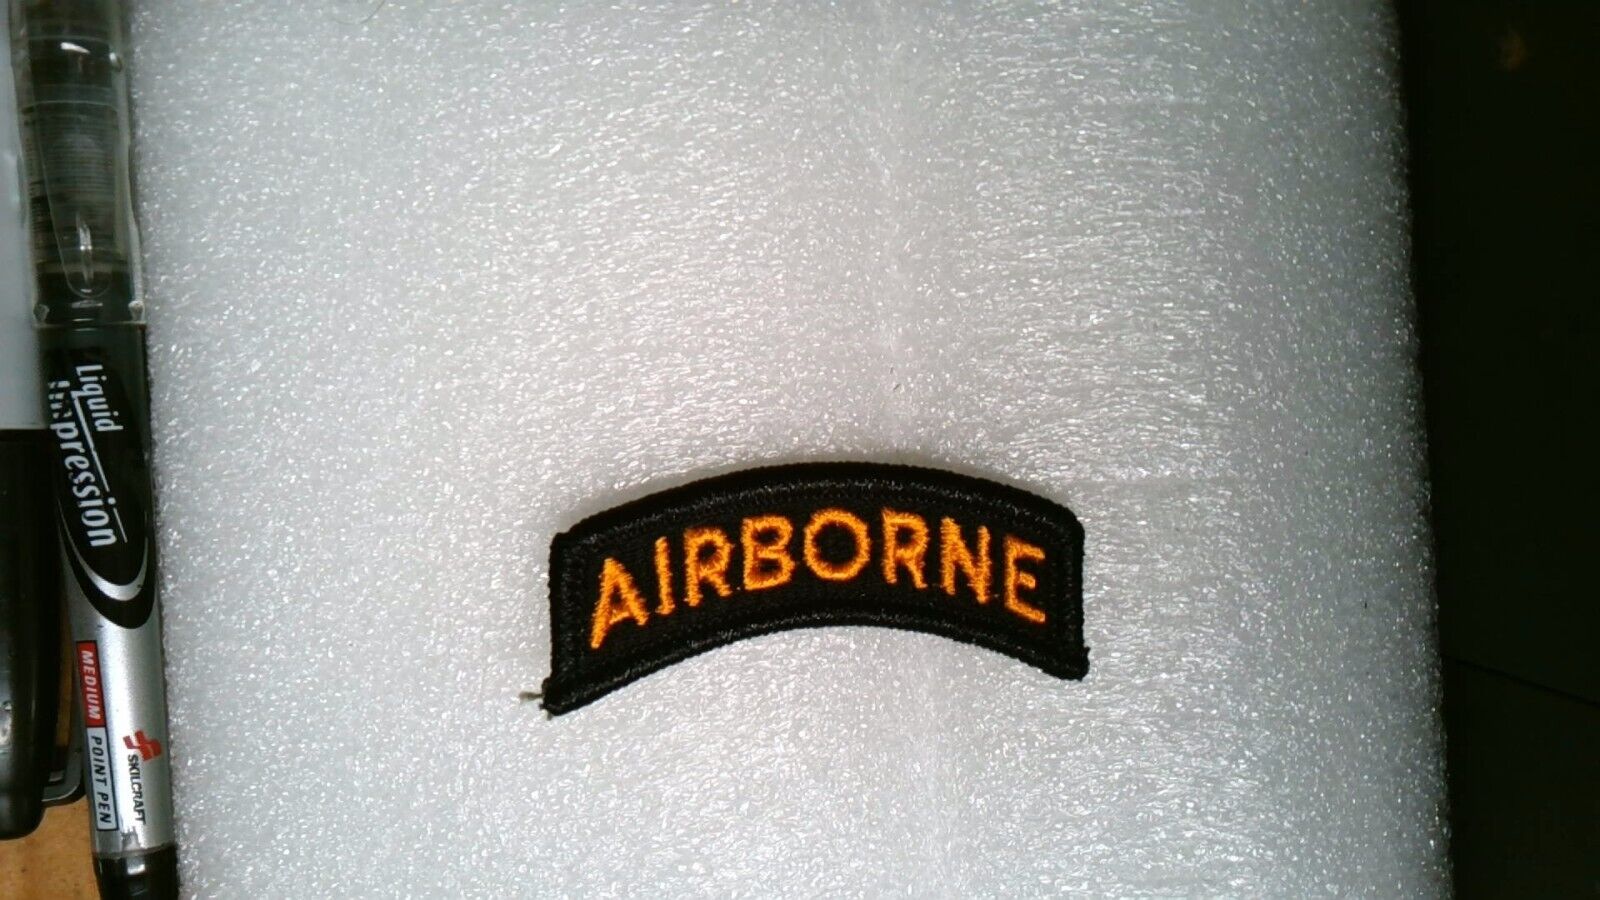 GENUINE MILITARY PATCH SEW ON US ARMY AIRBORNE TAB GOLD ON BLACK